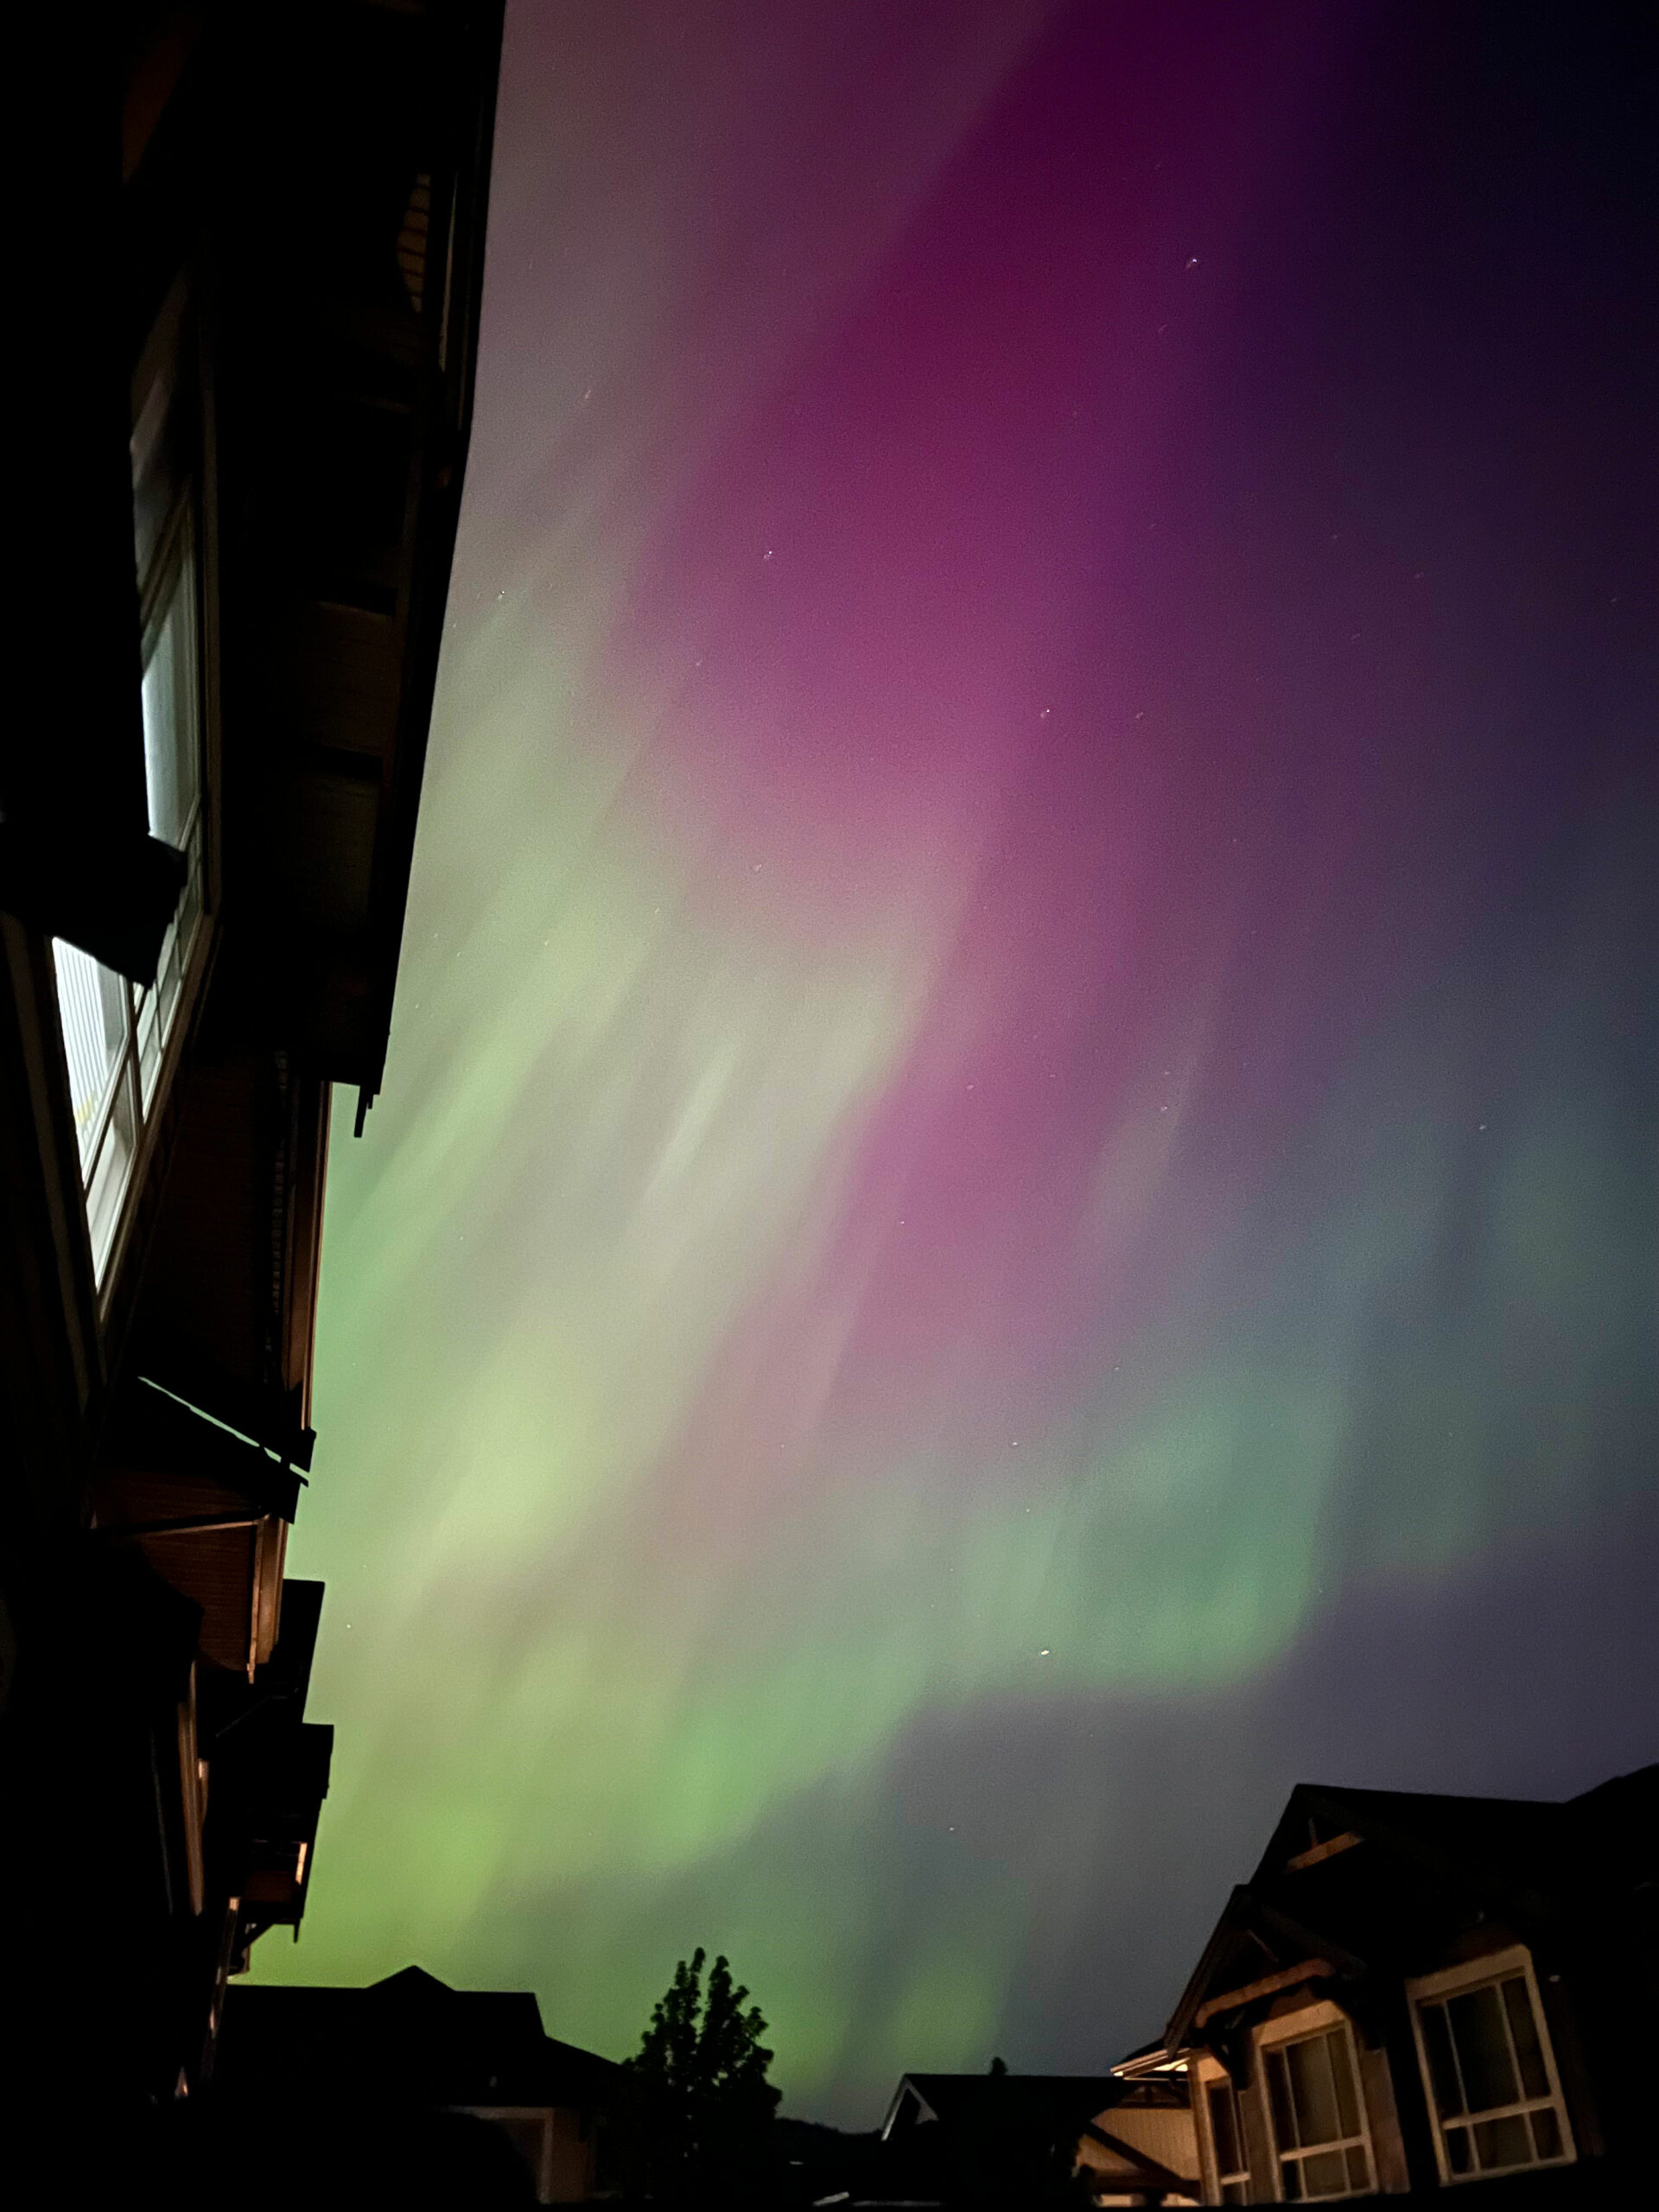 The Northern Lights are illuminated in the sky above a residential neighbourhood in shades of green, blue, and purple